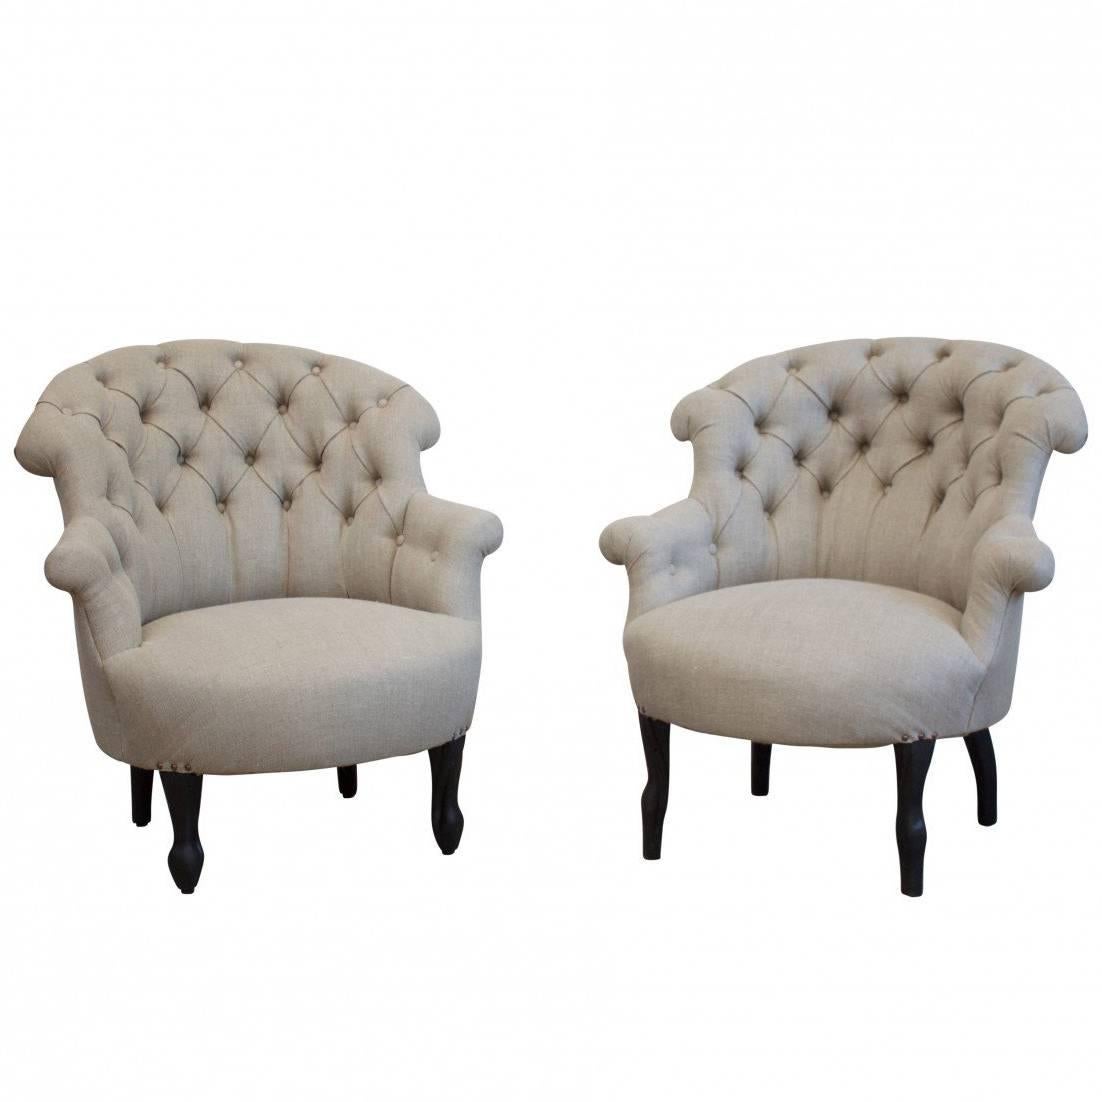 Near Matching Pair of French Armchairs